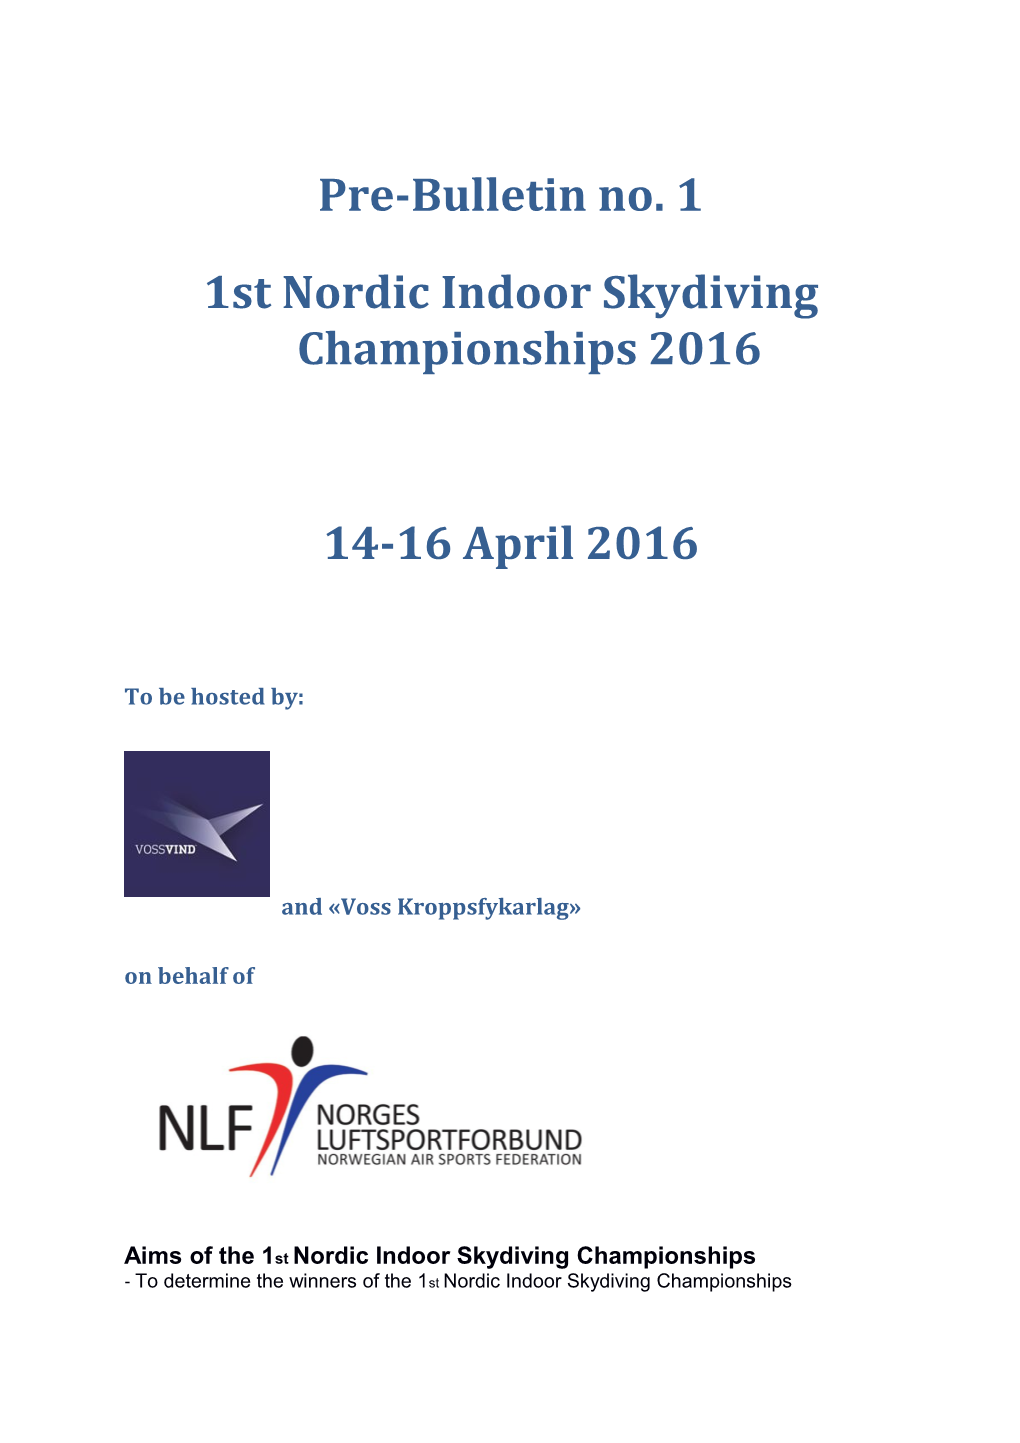 1St Nordic Indoorskydiving Championships 2016